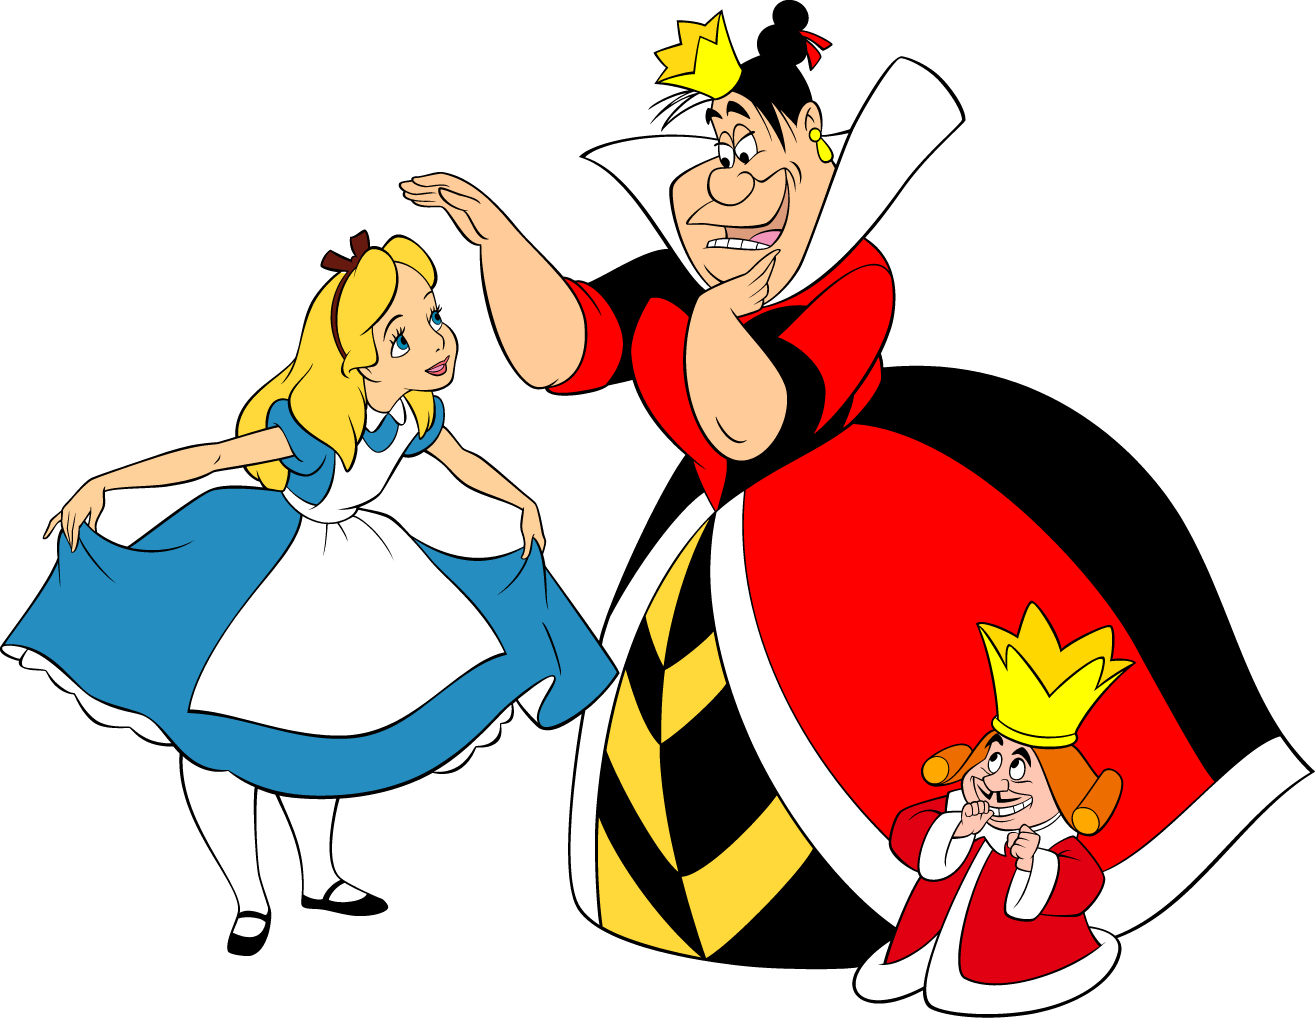 Image of characters free. Cup clipart alice in wonderland